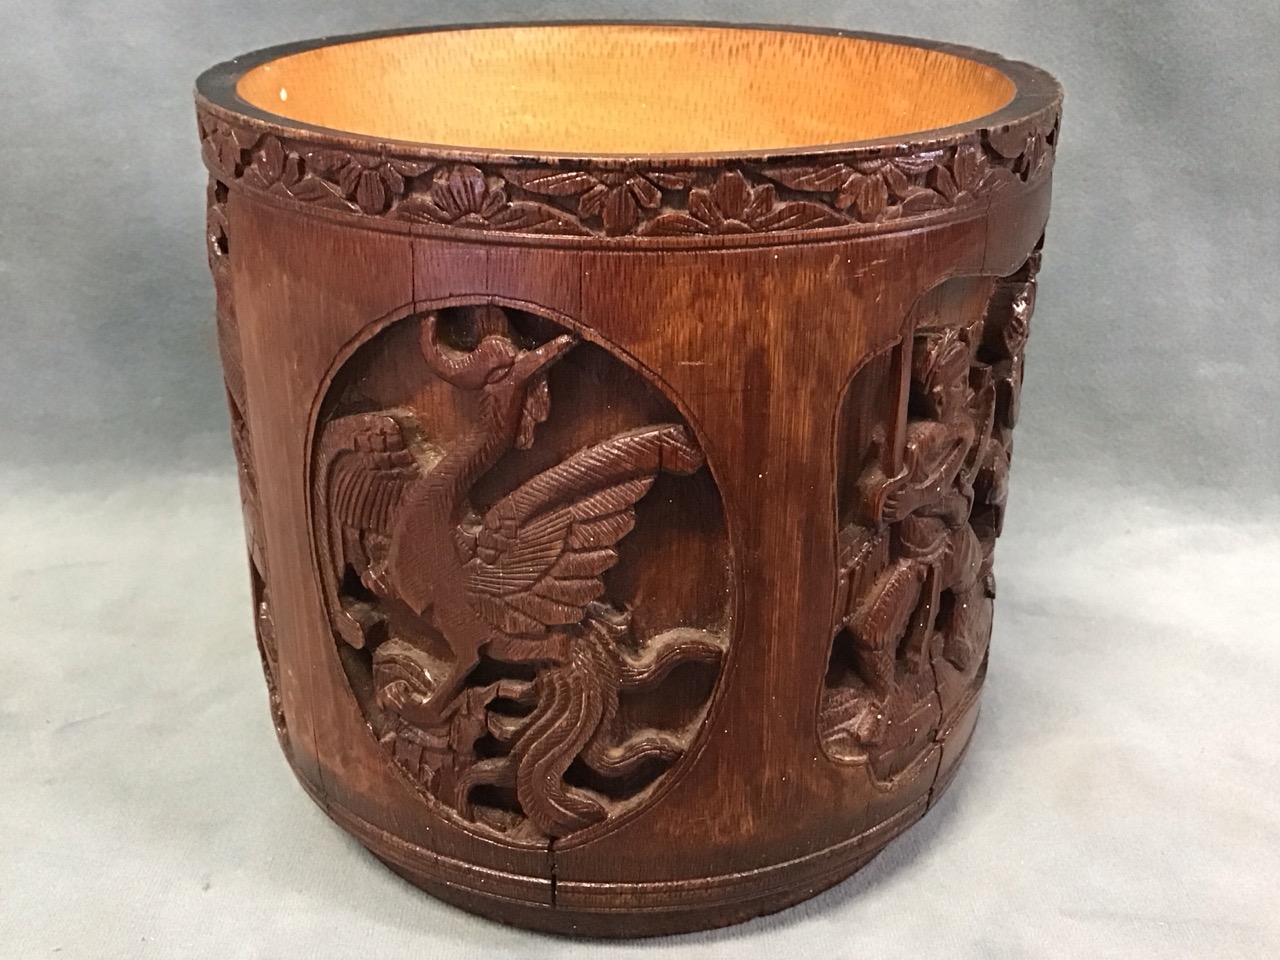 A C19th Chinese bamboo brush pot carved with panels of phoenixes, warriors and courtly figures in - Image 2 of 3